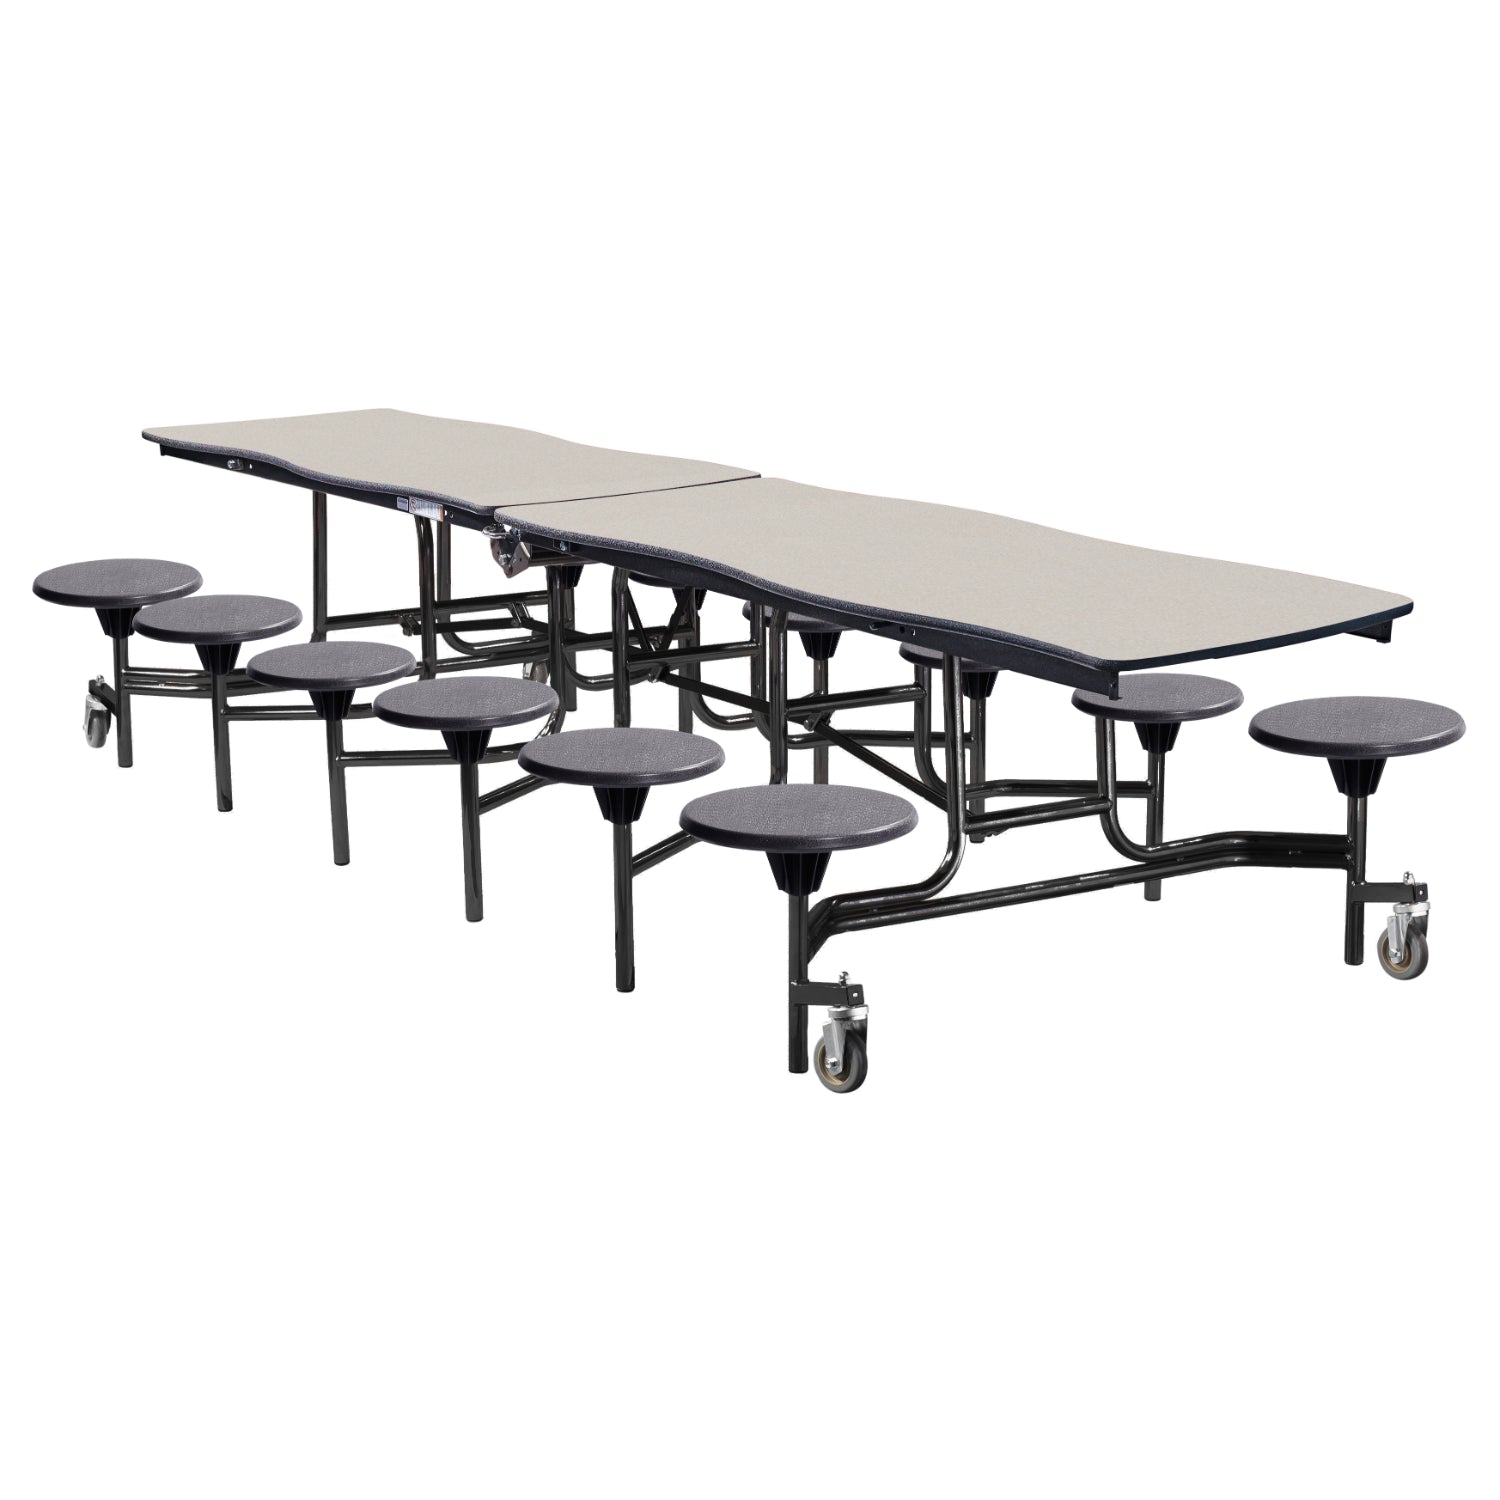 Mobile Cafeteria Table with 12 Stools, 12' Swerve, Particleboard Core, Vinyl T-Mold Edge, Textured Black Frame